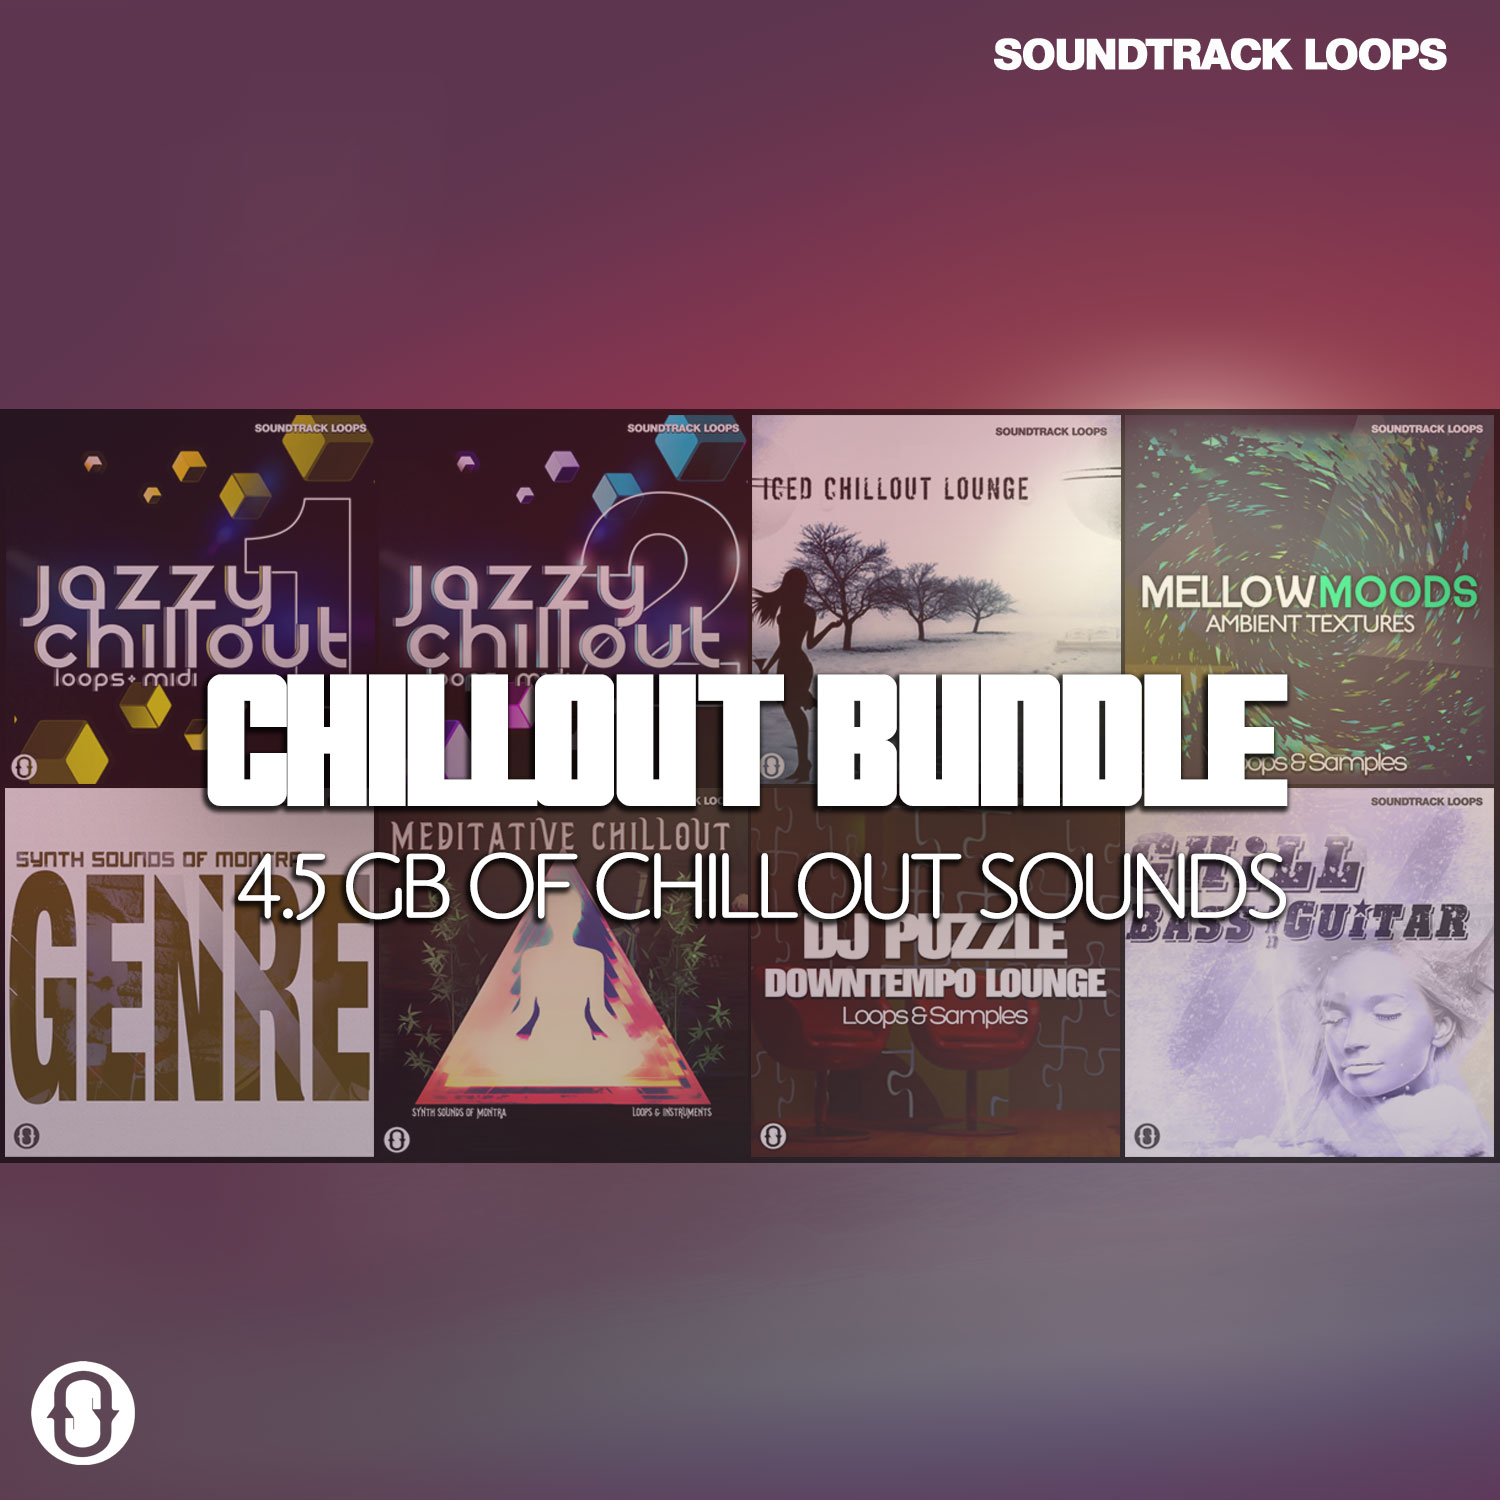 Download Chillout Bundle from Soundtrack Loops 4.5 GB of Sounds for 10